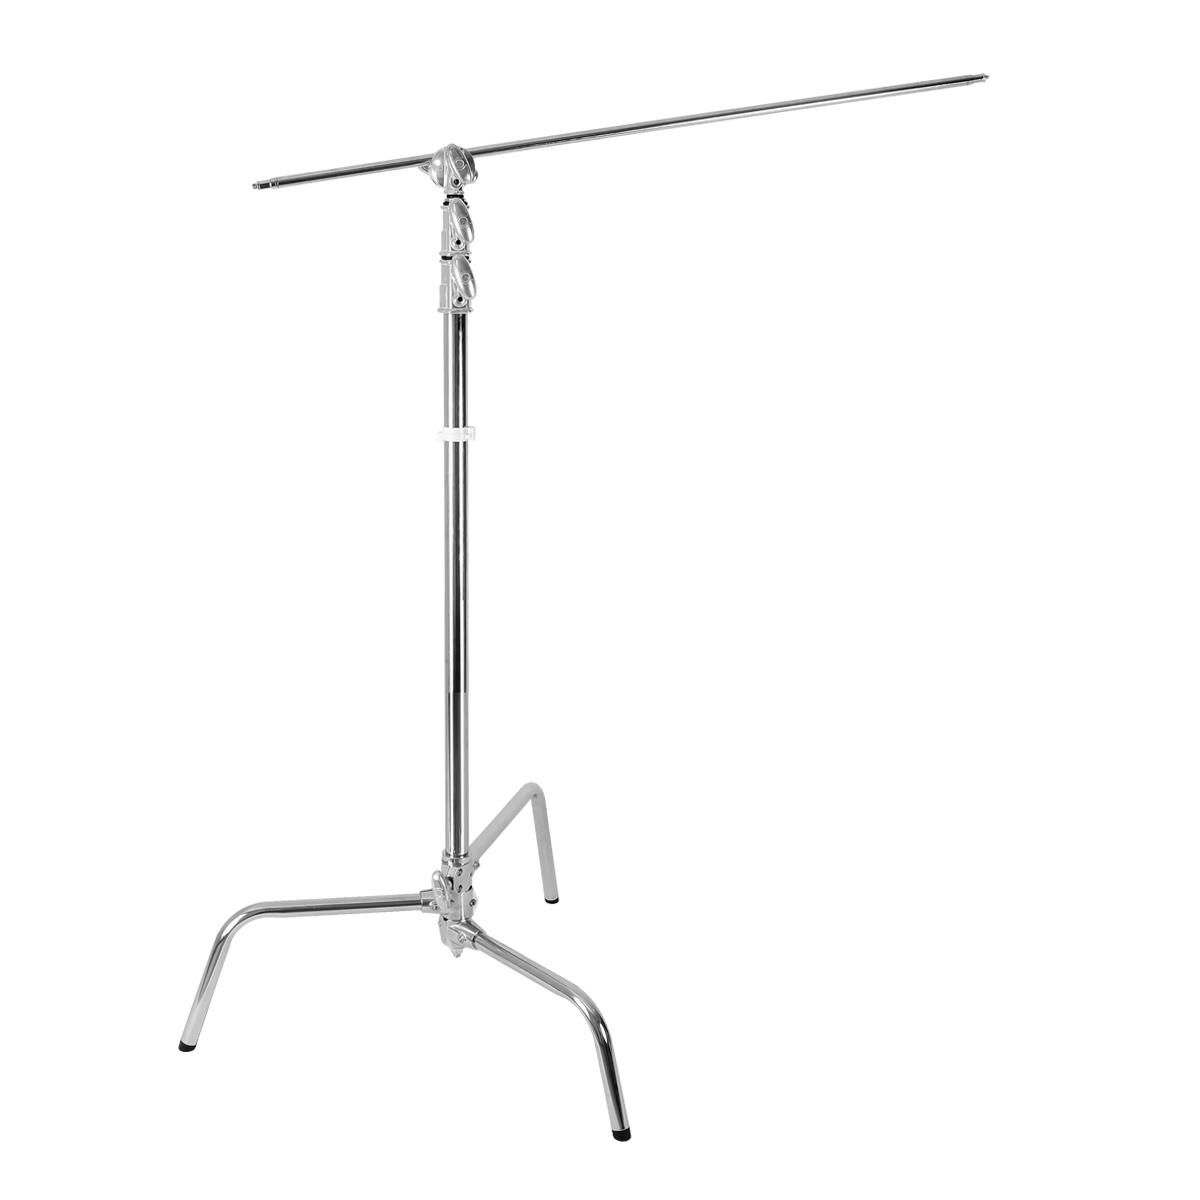 Godox C-Stand with Arm &amp; Grip Head (7.8', Silver)